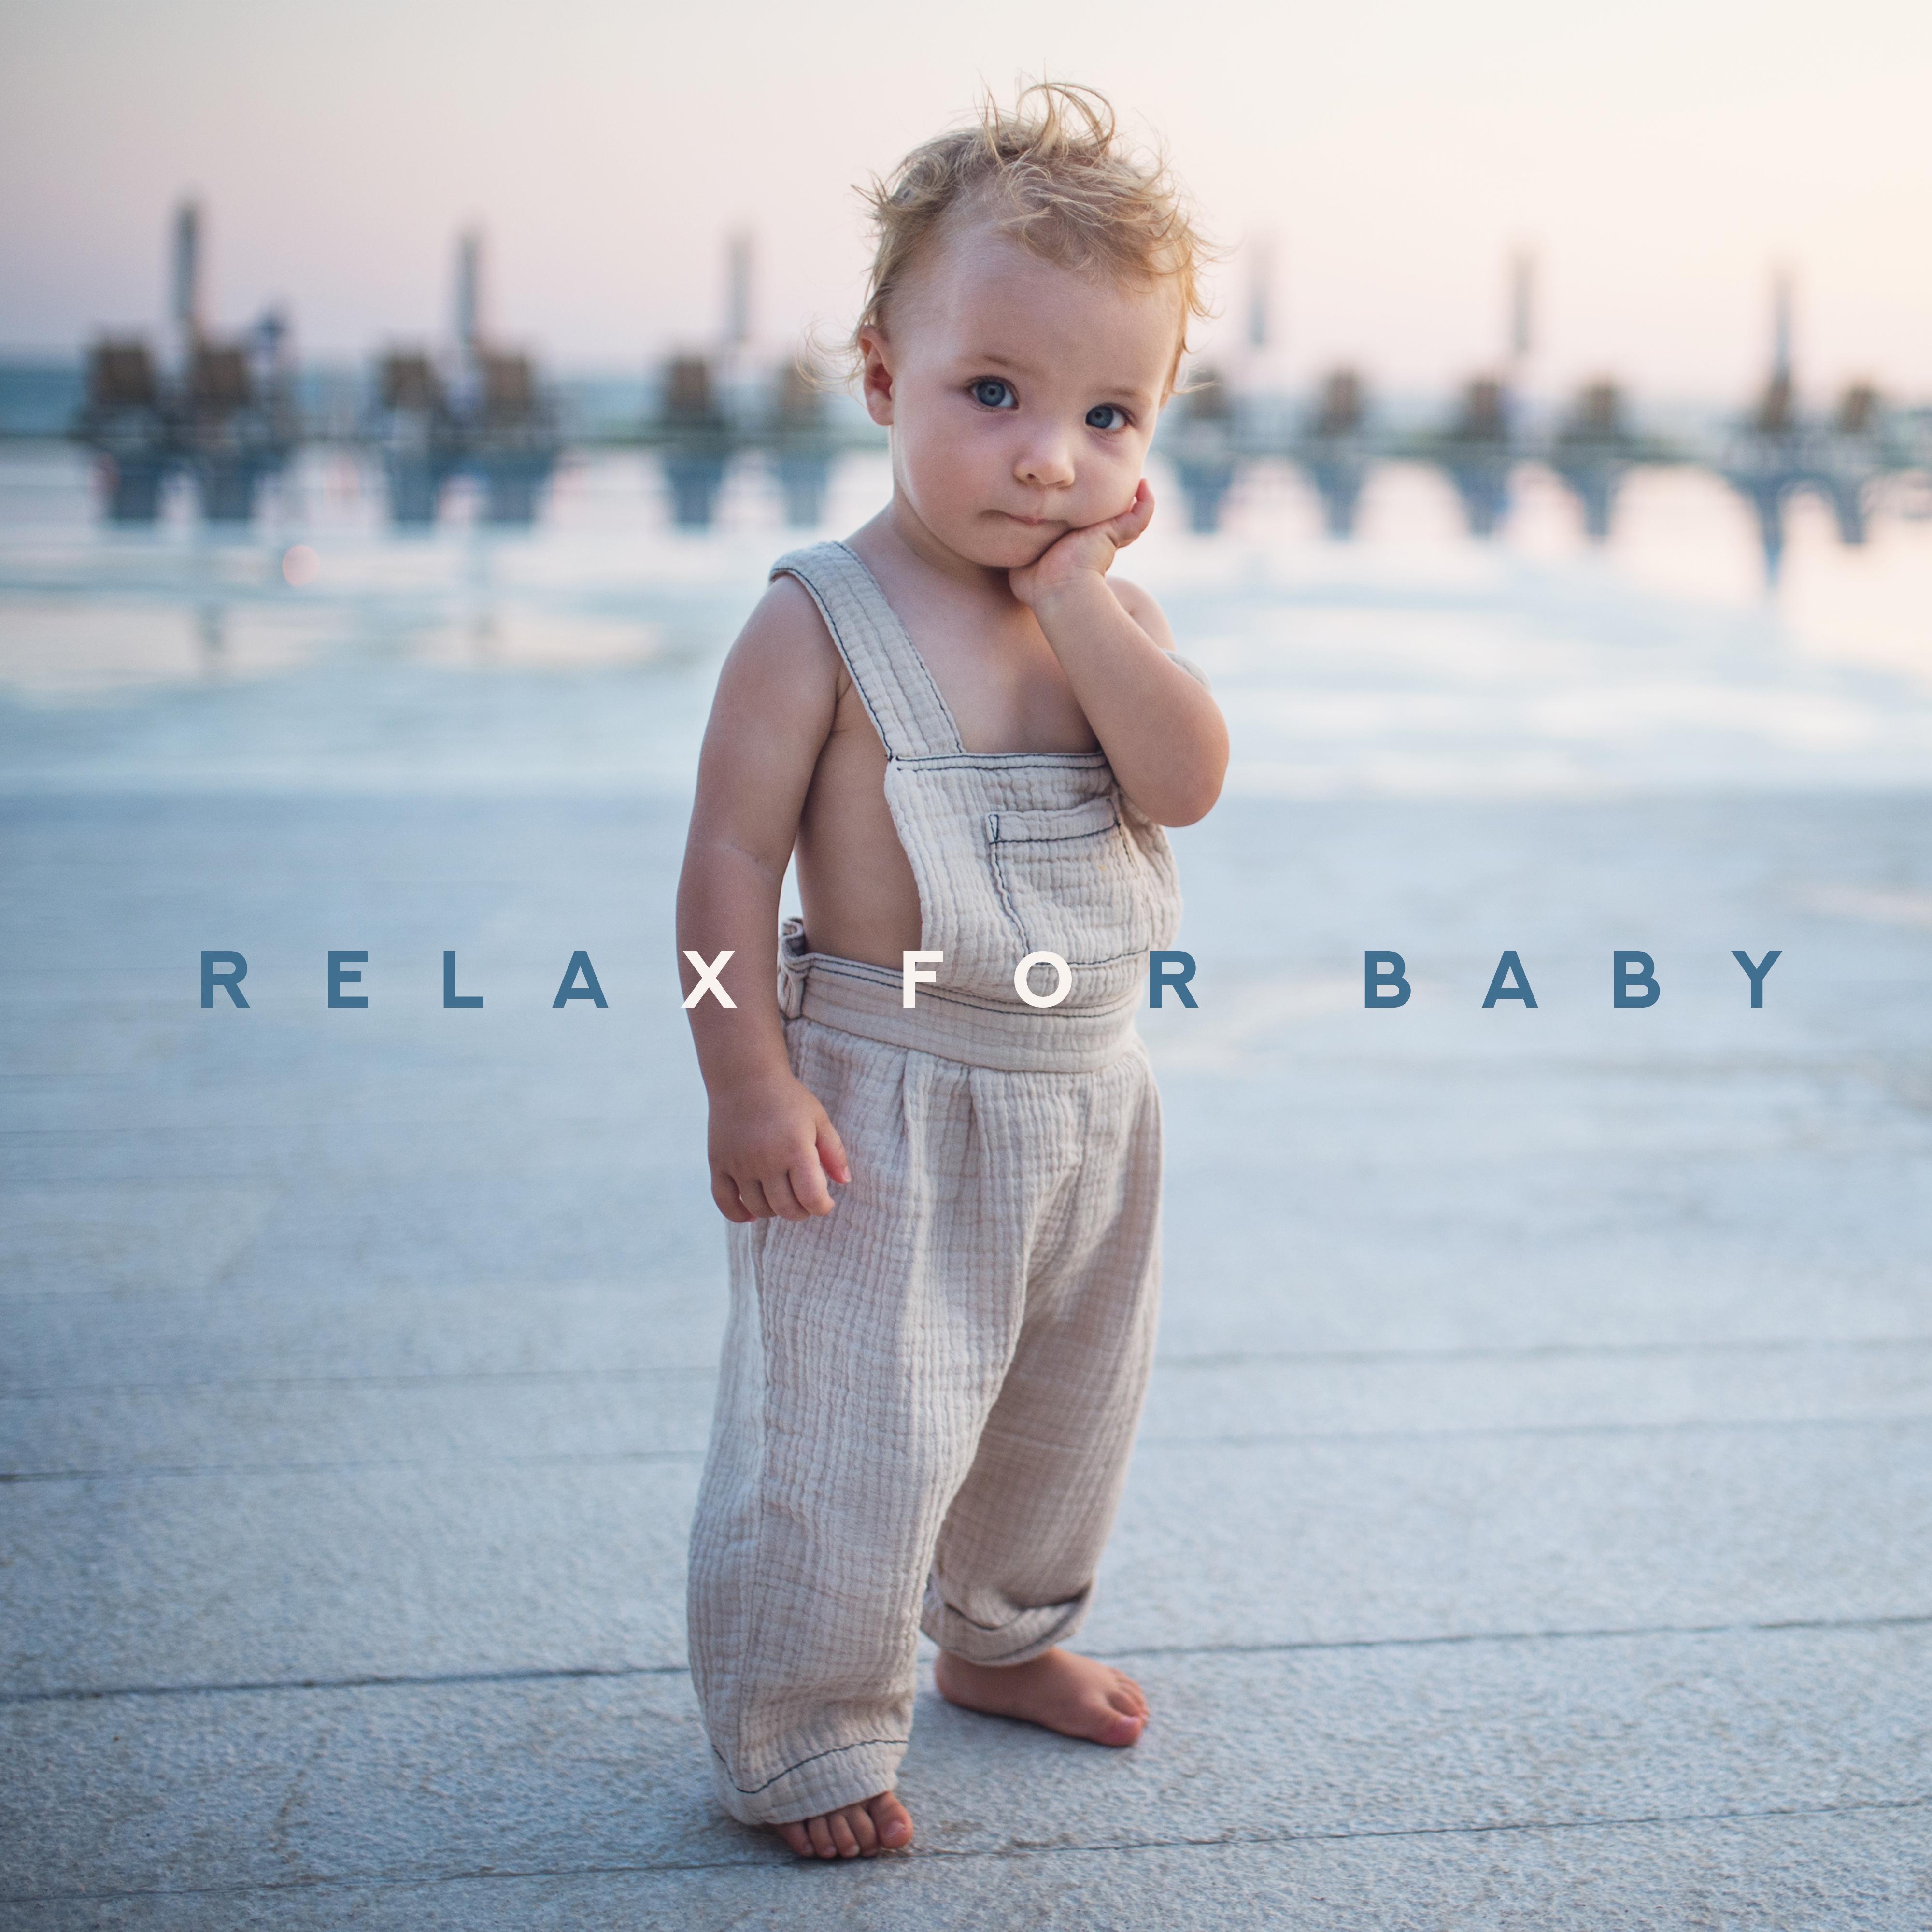 Relax for Baby  Relaxing Lullabies at Night, Toddler Music, Relaxed Baby, Deeper Sleep, Soothing Sounds for Kids, Ambient Music